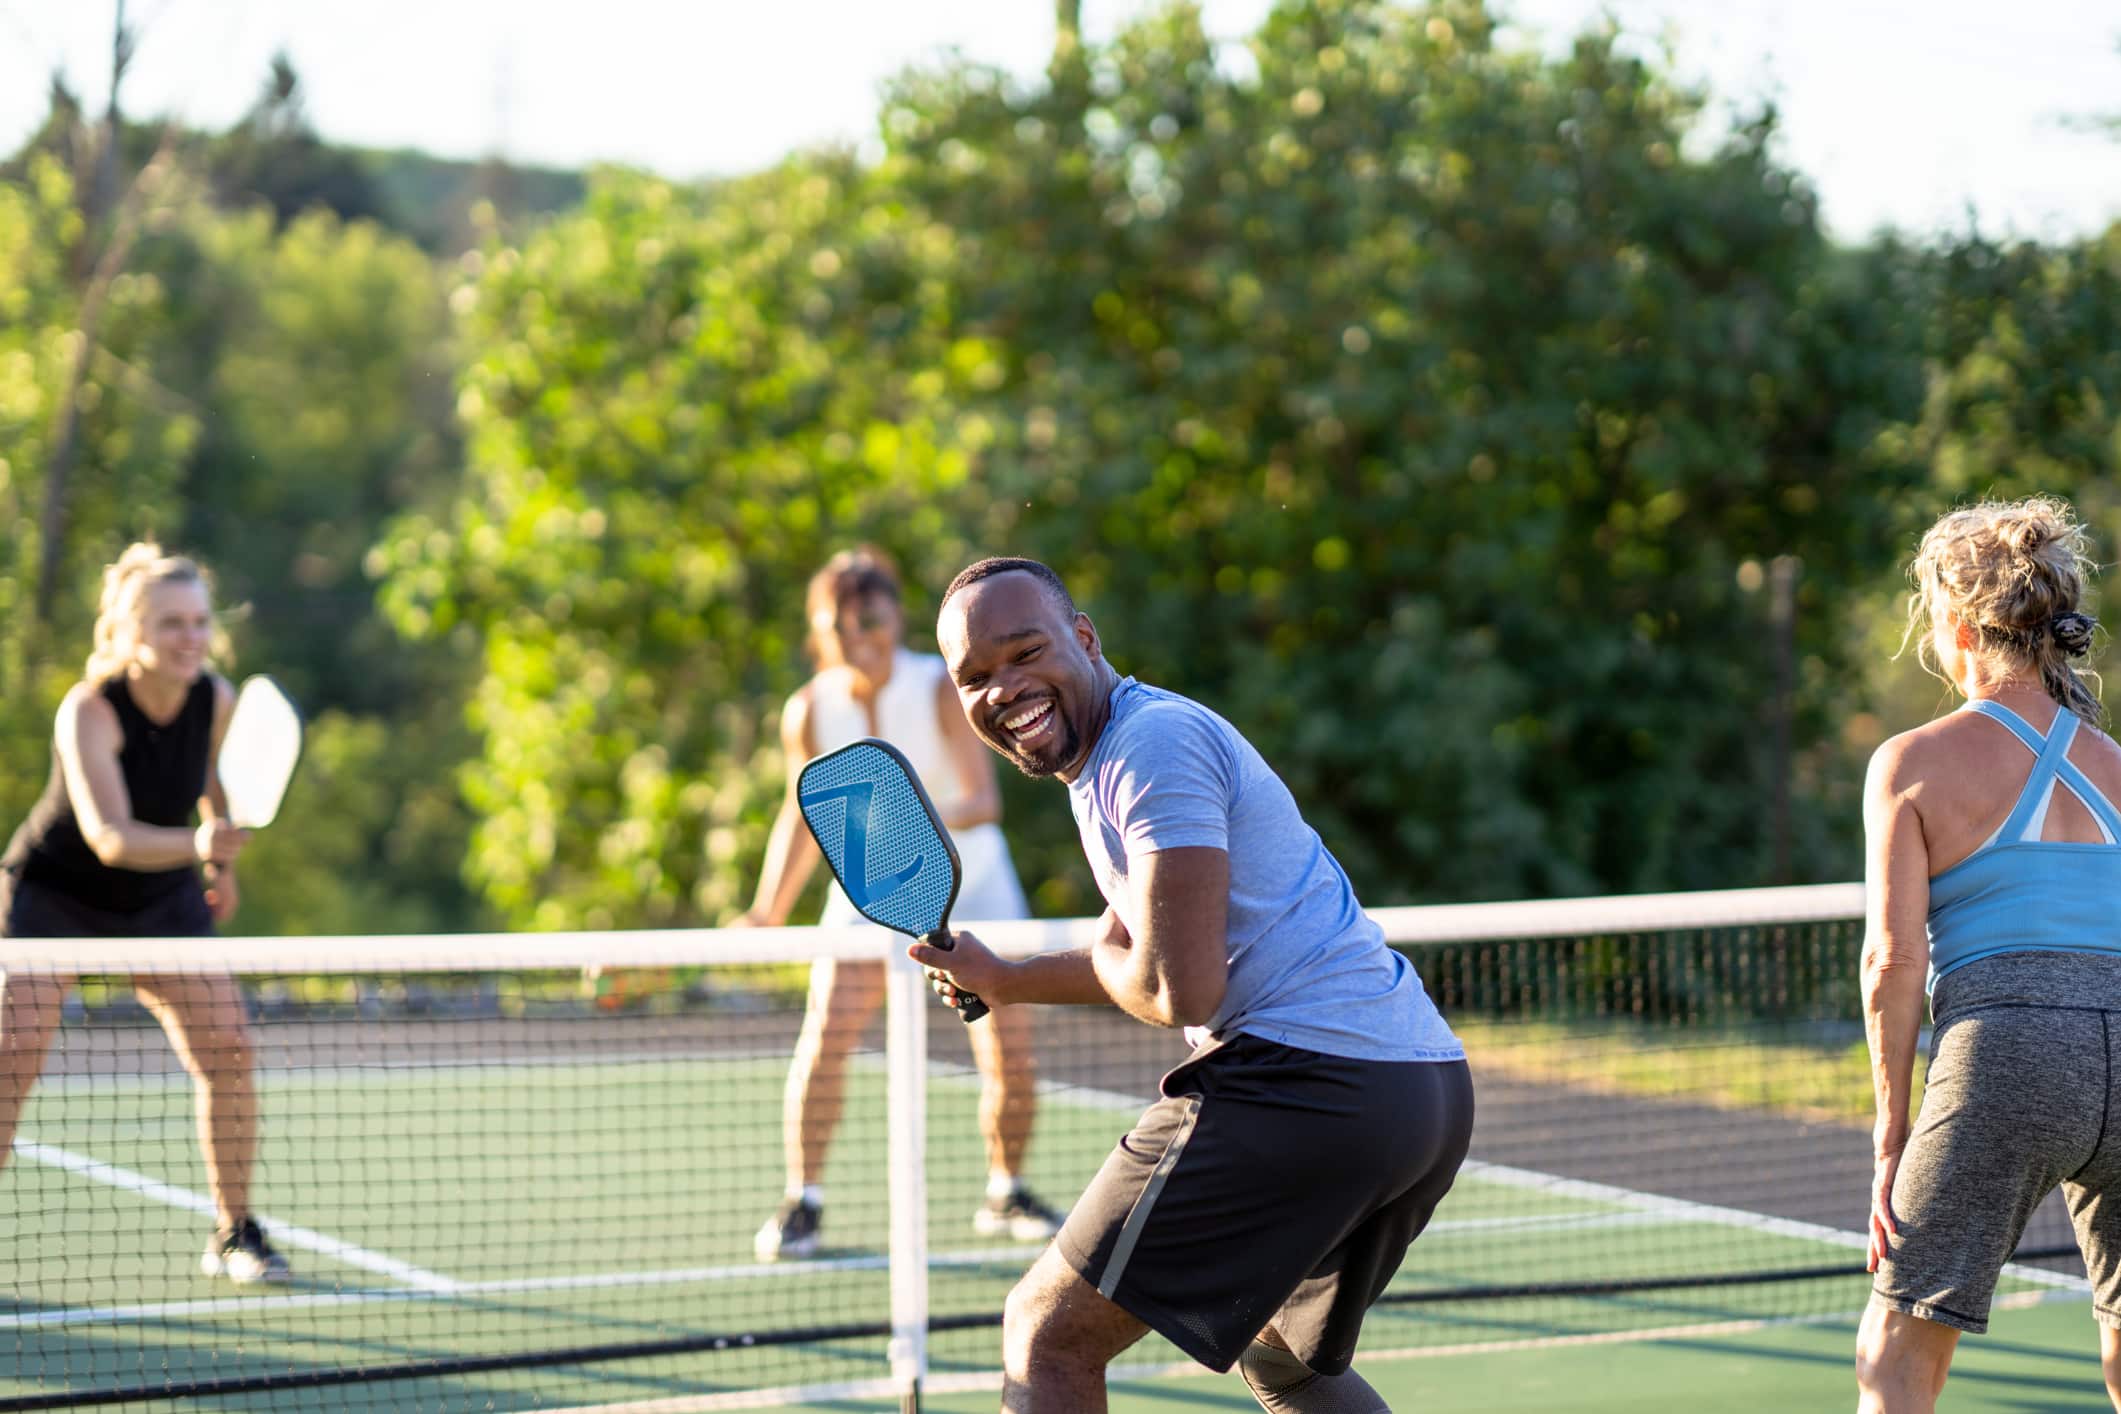 A group of friends plays pickleball together on an outdoor court on a sunny day.